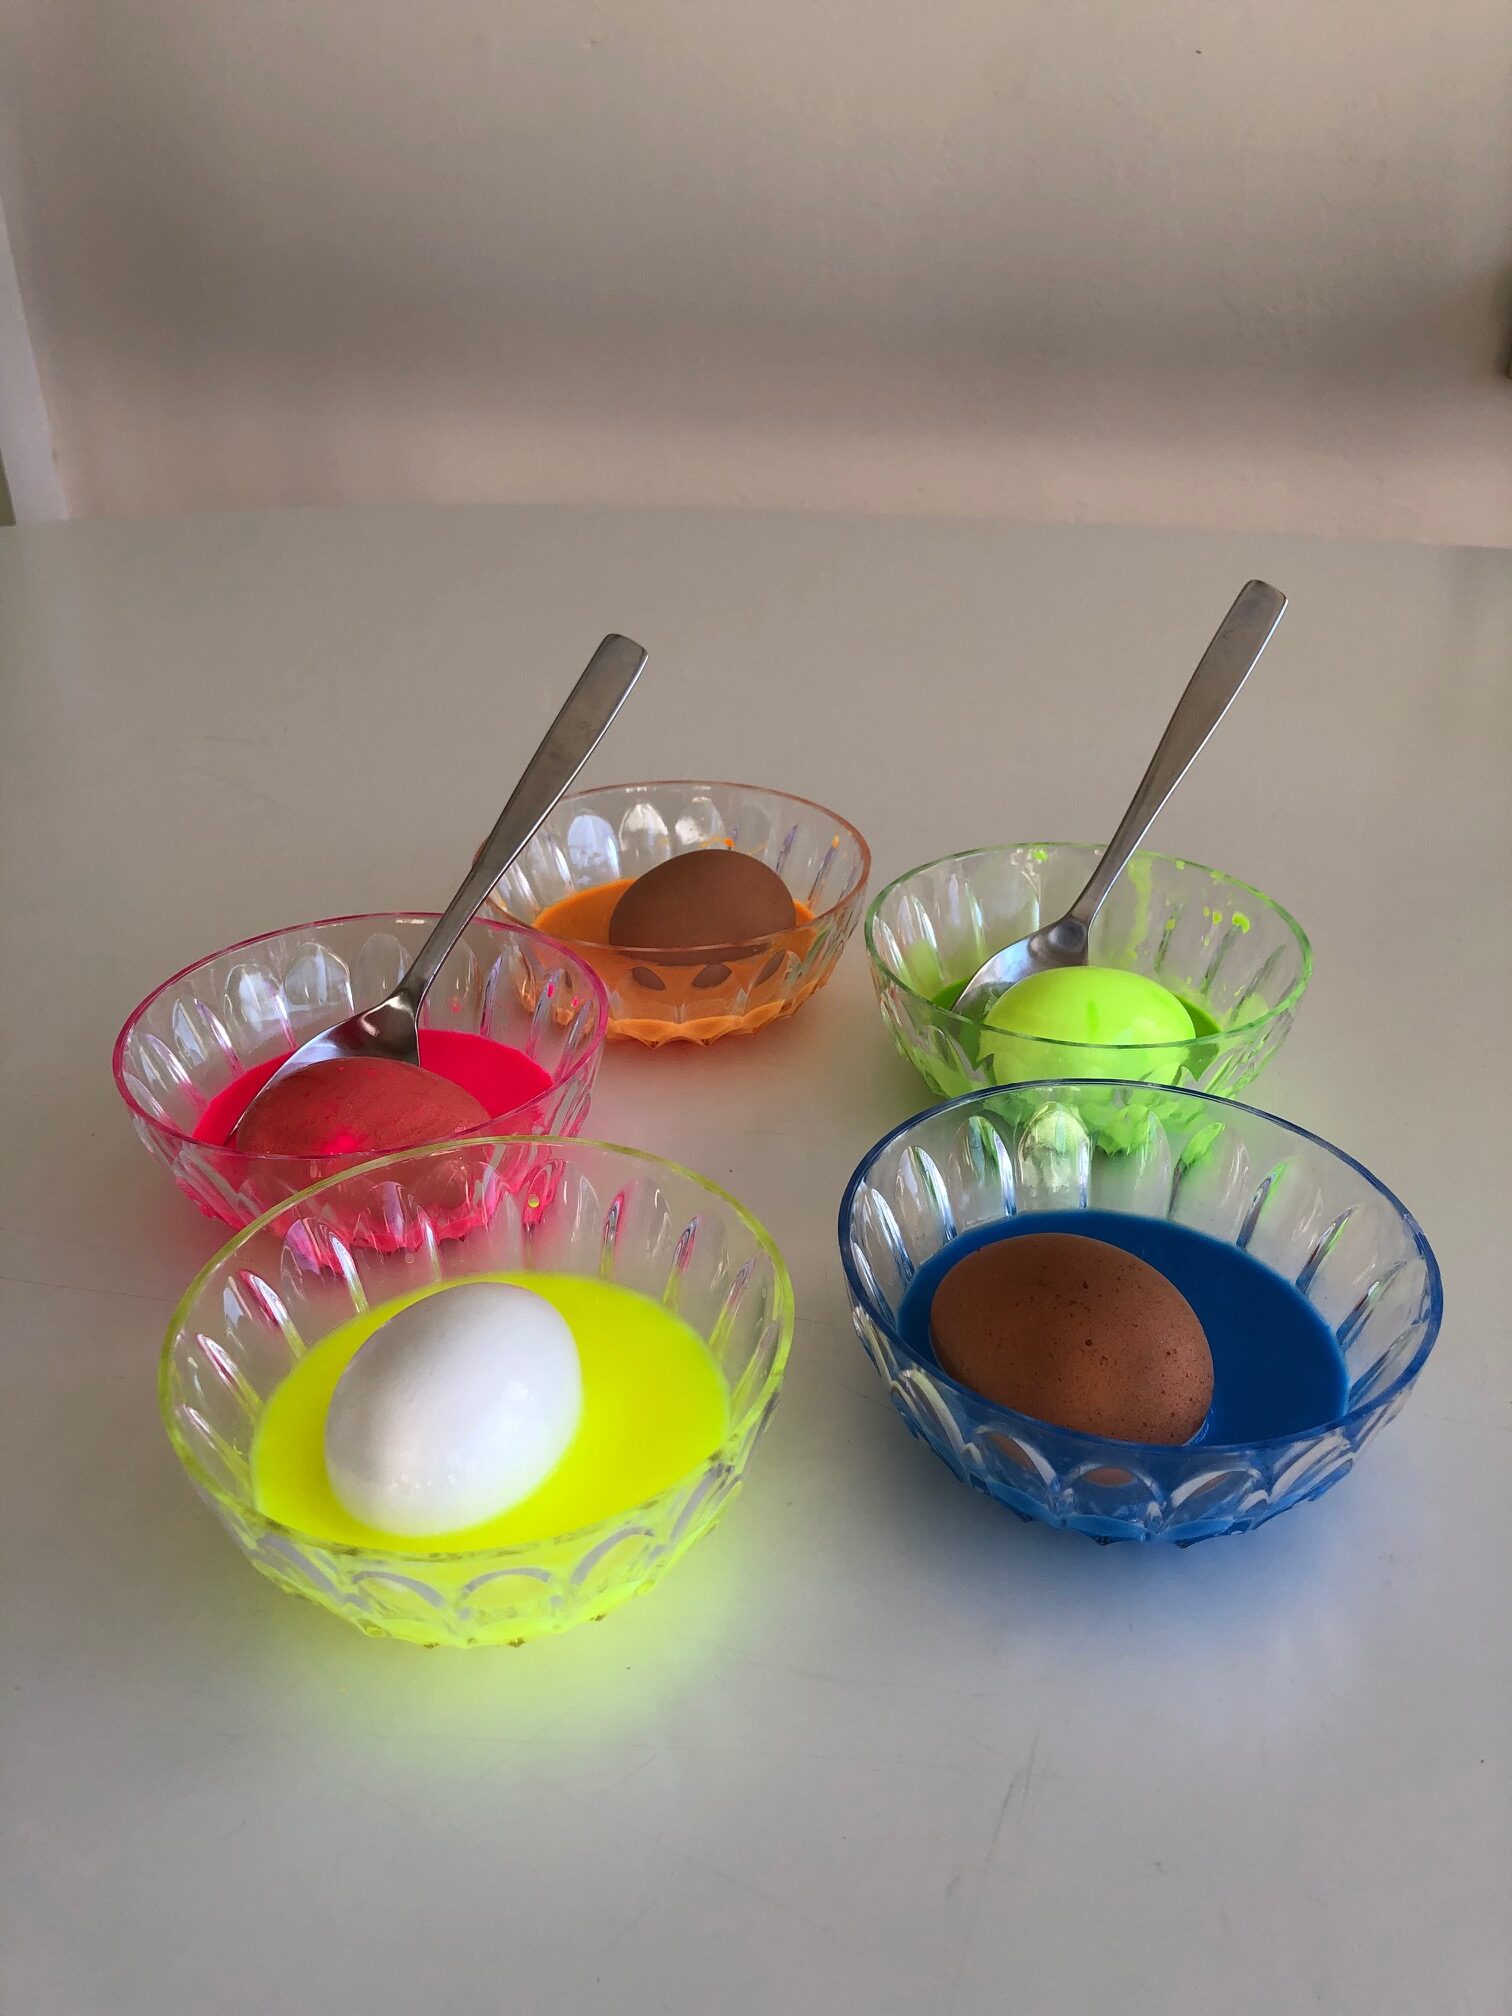 How to Decorate Neon Glow-In-The-Dark Eggs